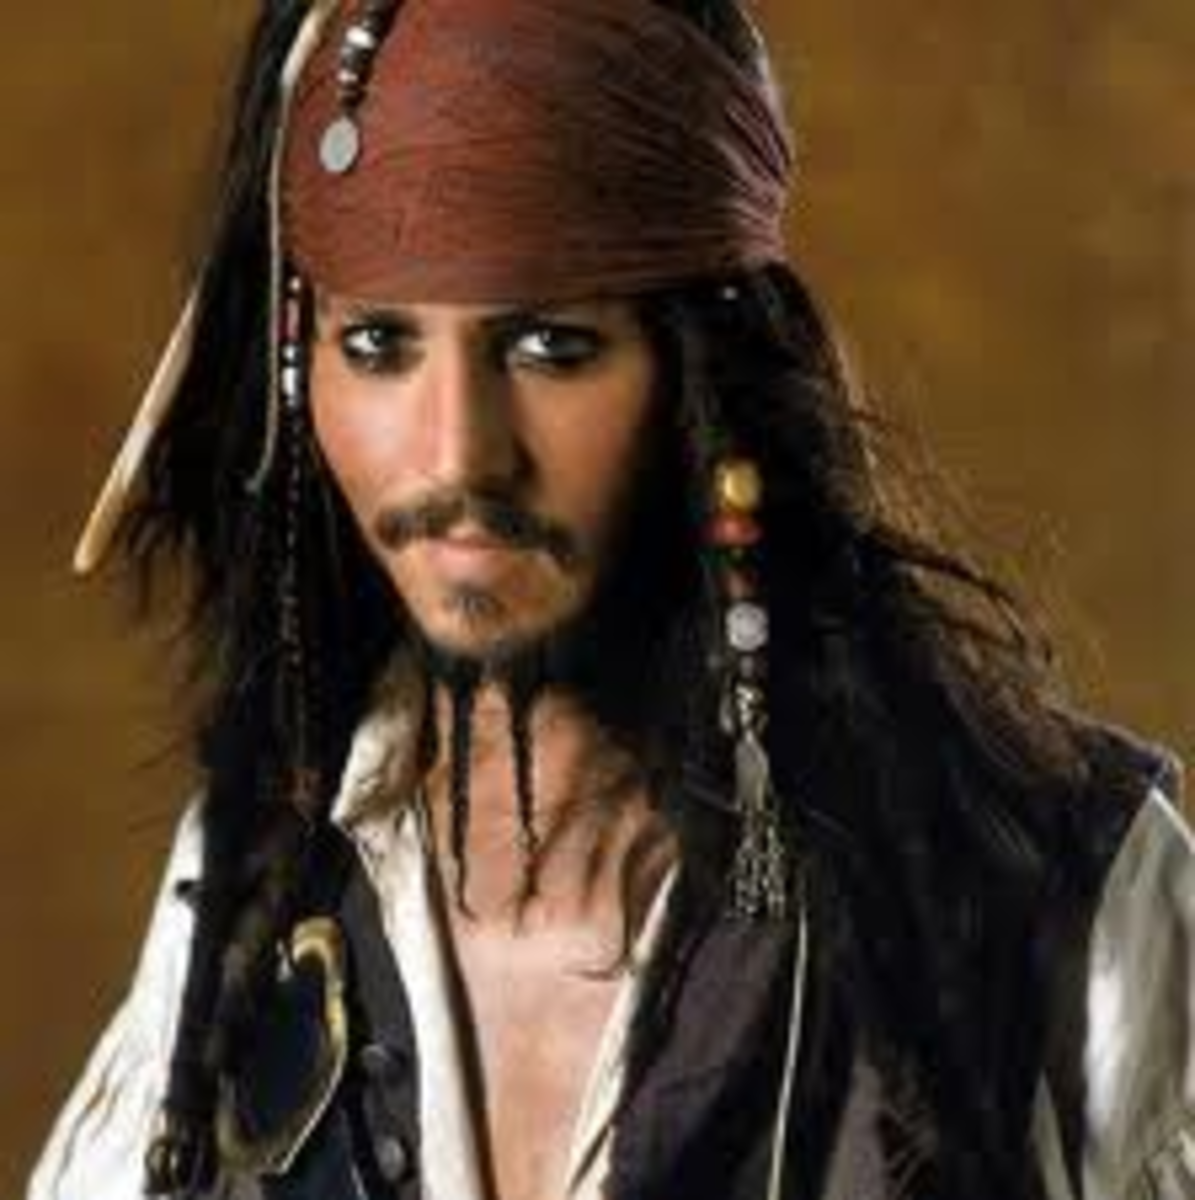 Jack Sparrow (Johnny Depp) in Pirates of the Caribbean